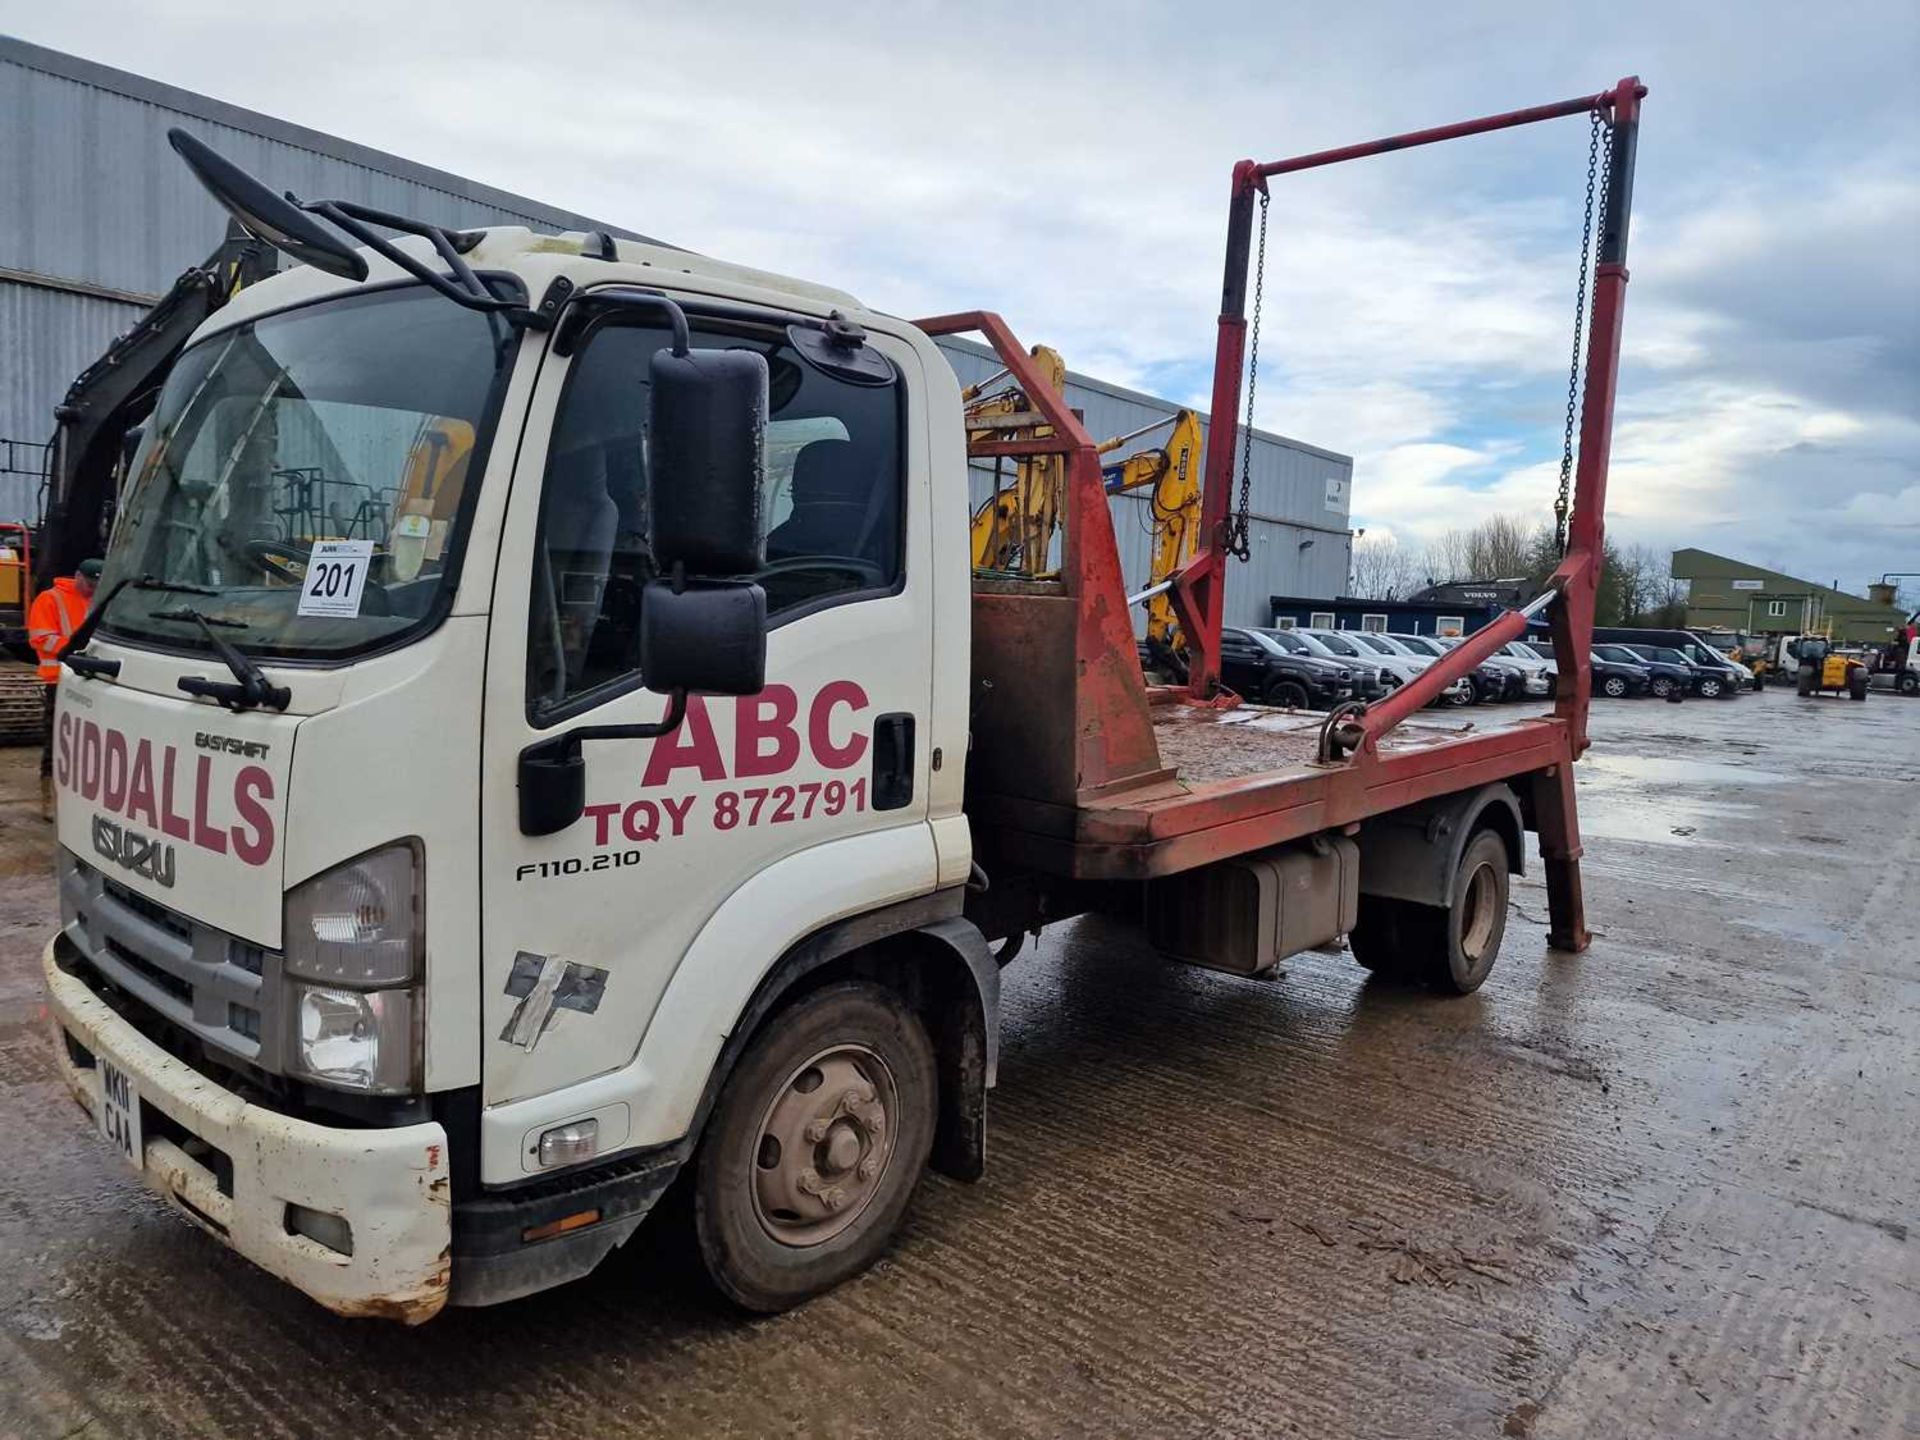 2011 Isuzu F110.210 4x2 Skip Loader Lorry, Extendable Arms, Automatic Gear Box (Reg. Docs. Available - Image 2 of 21